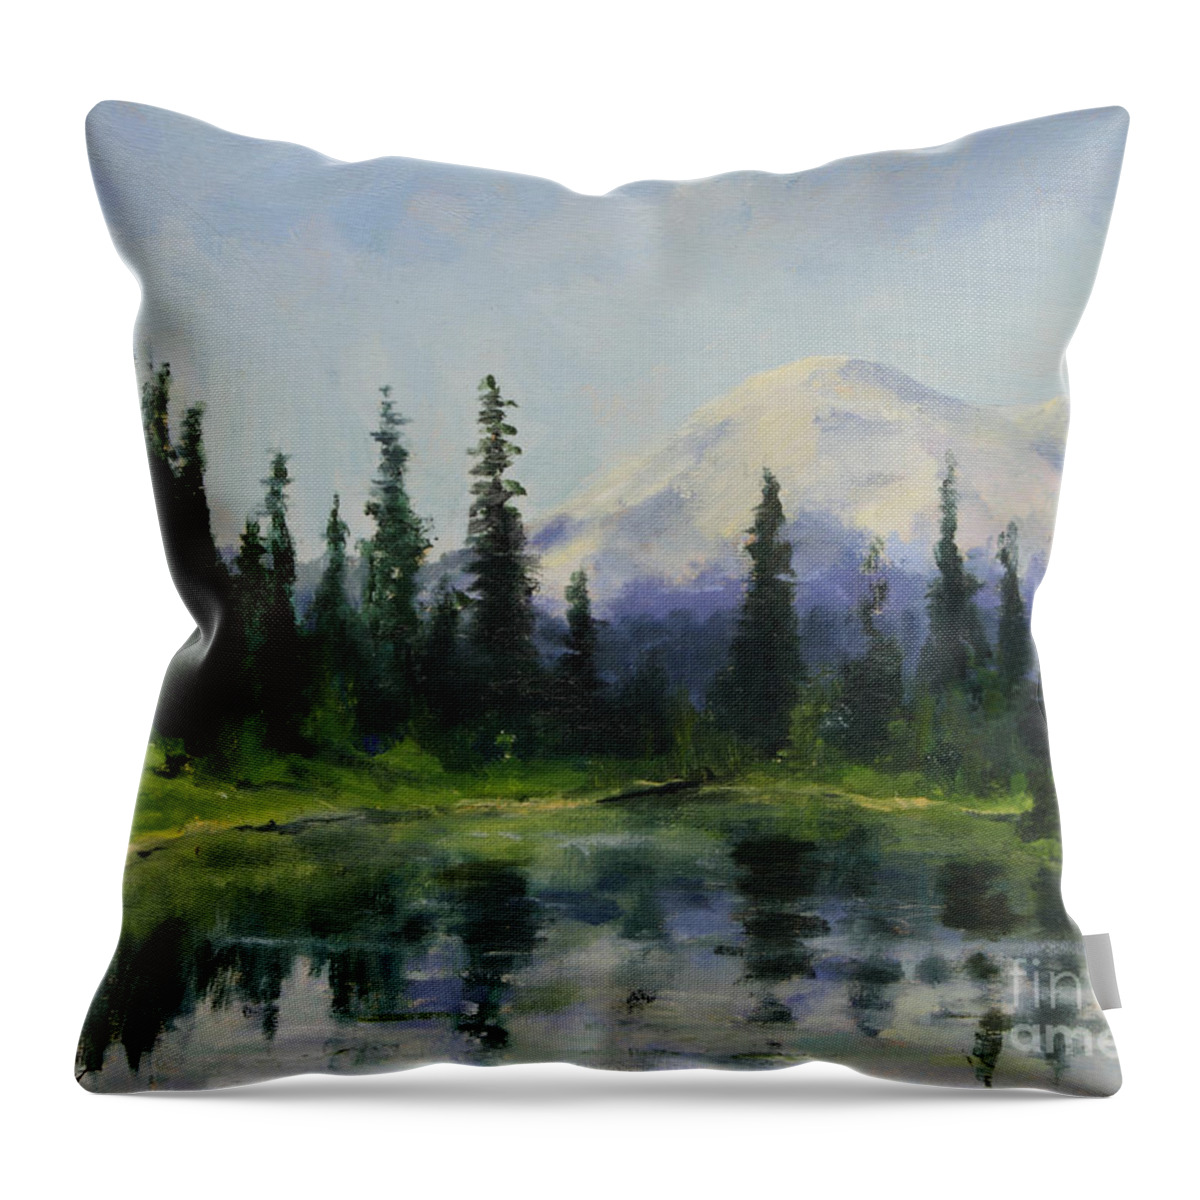 Mountains Throw Pillow featuring the painting Picnic by the Lake by Maria Hunt